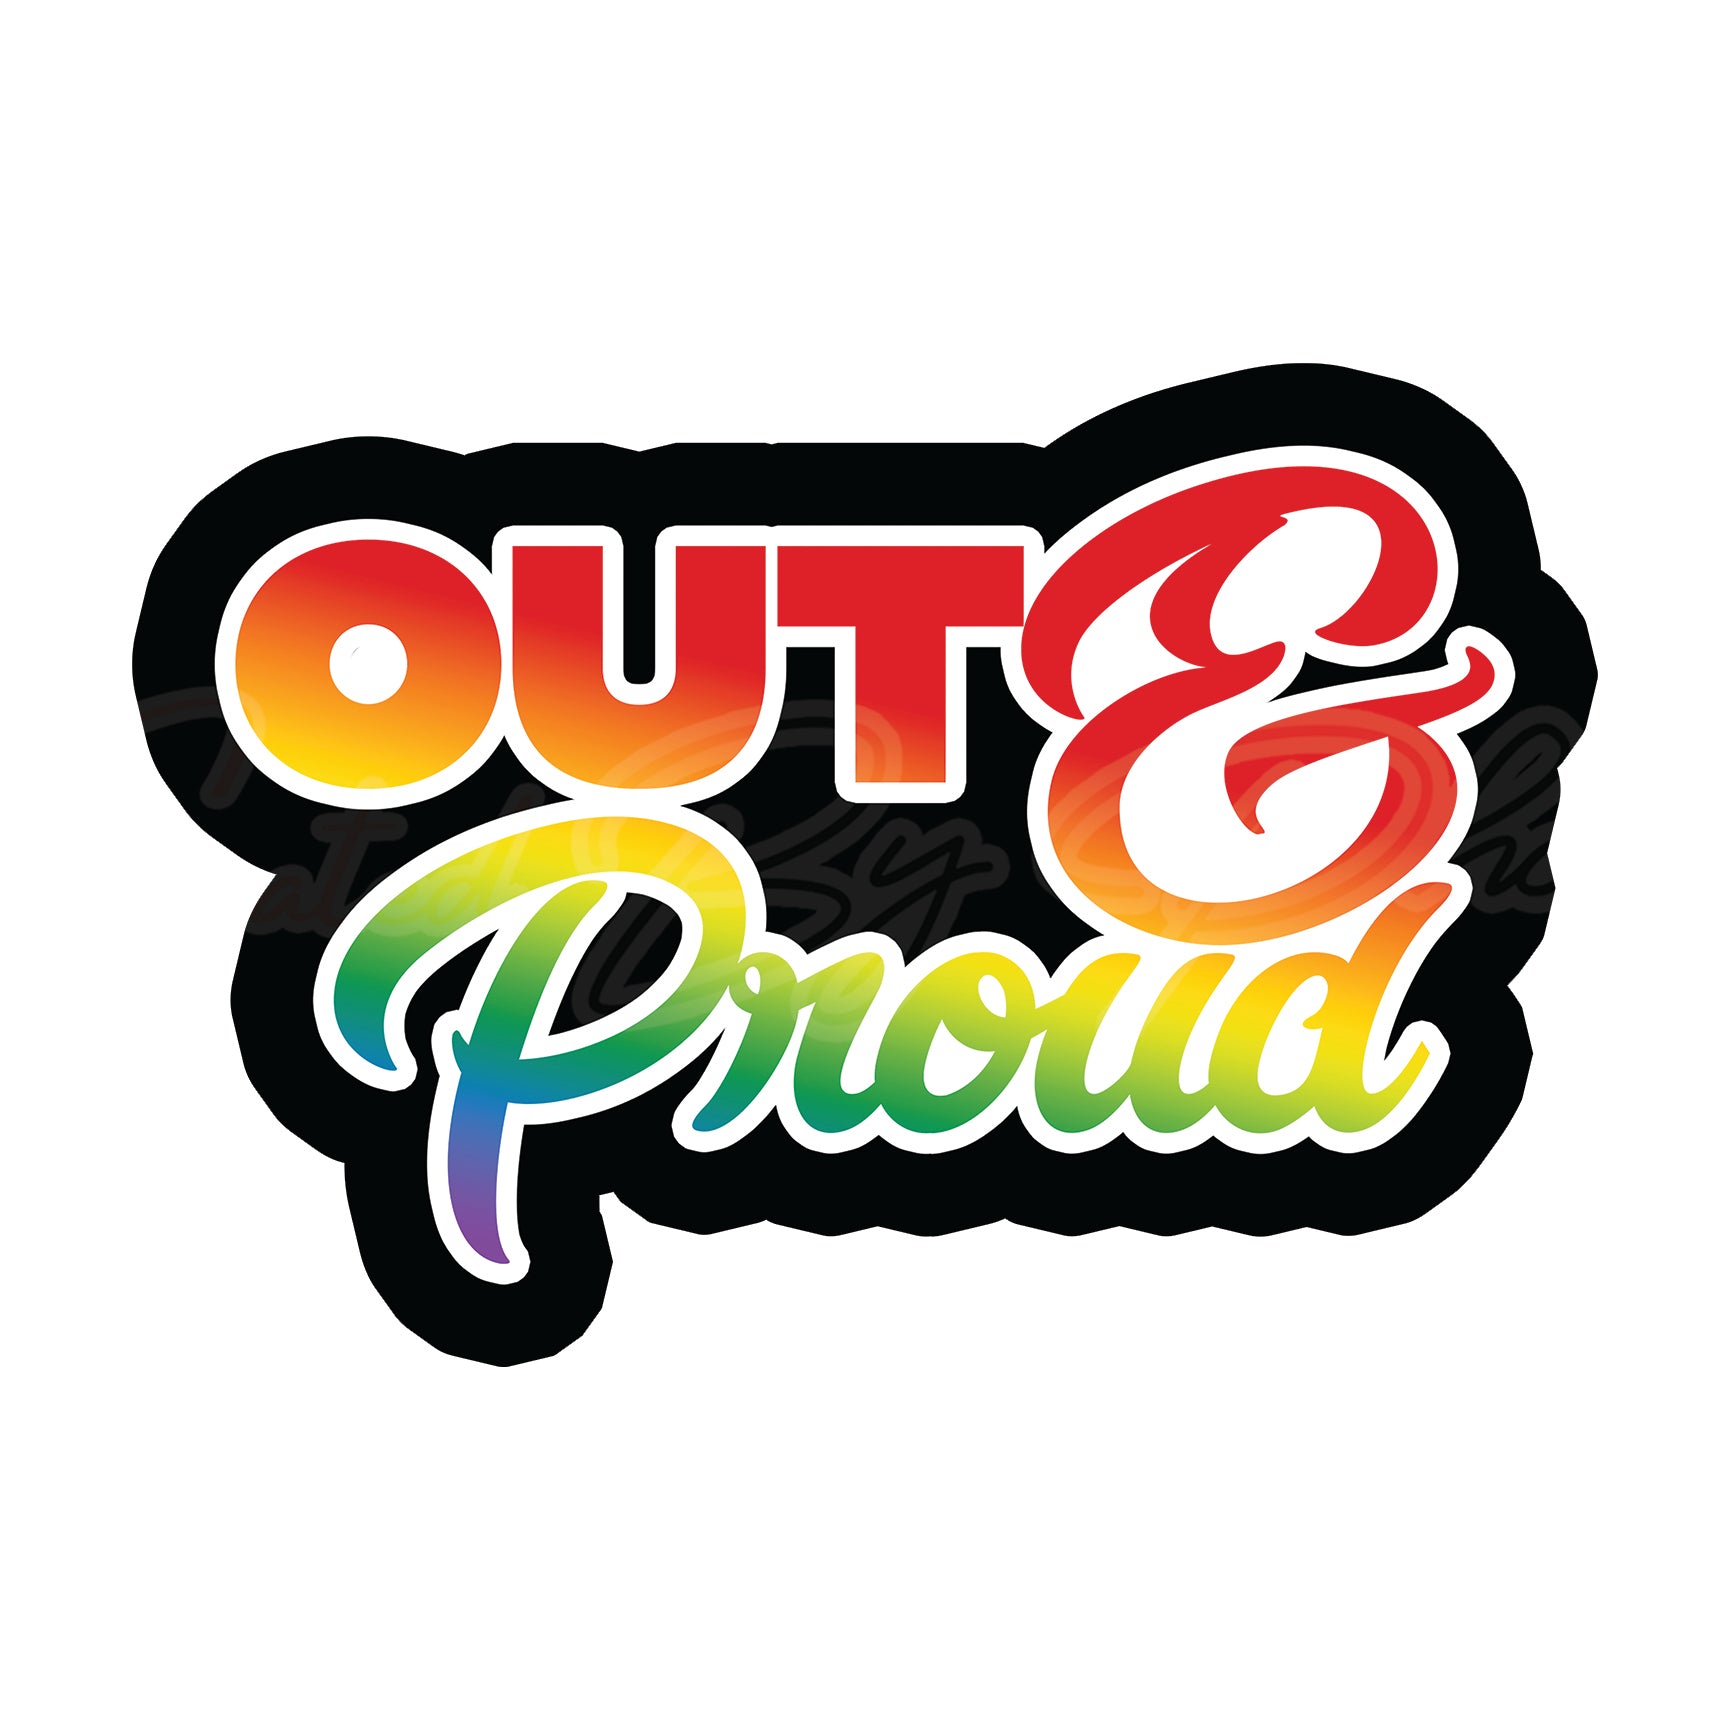  Out And Proud  prop-pride photo booth props-pride props-photo booth props-custom props- custom prop signs-props -Curated by Phoenix 